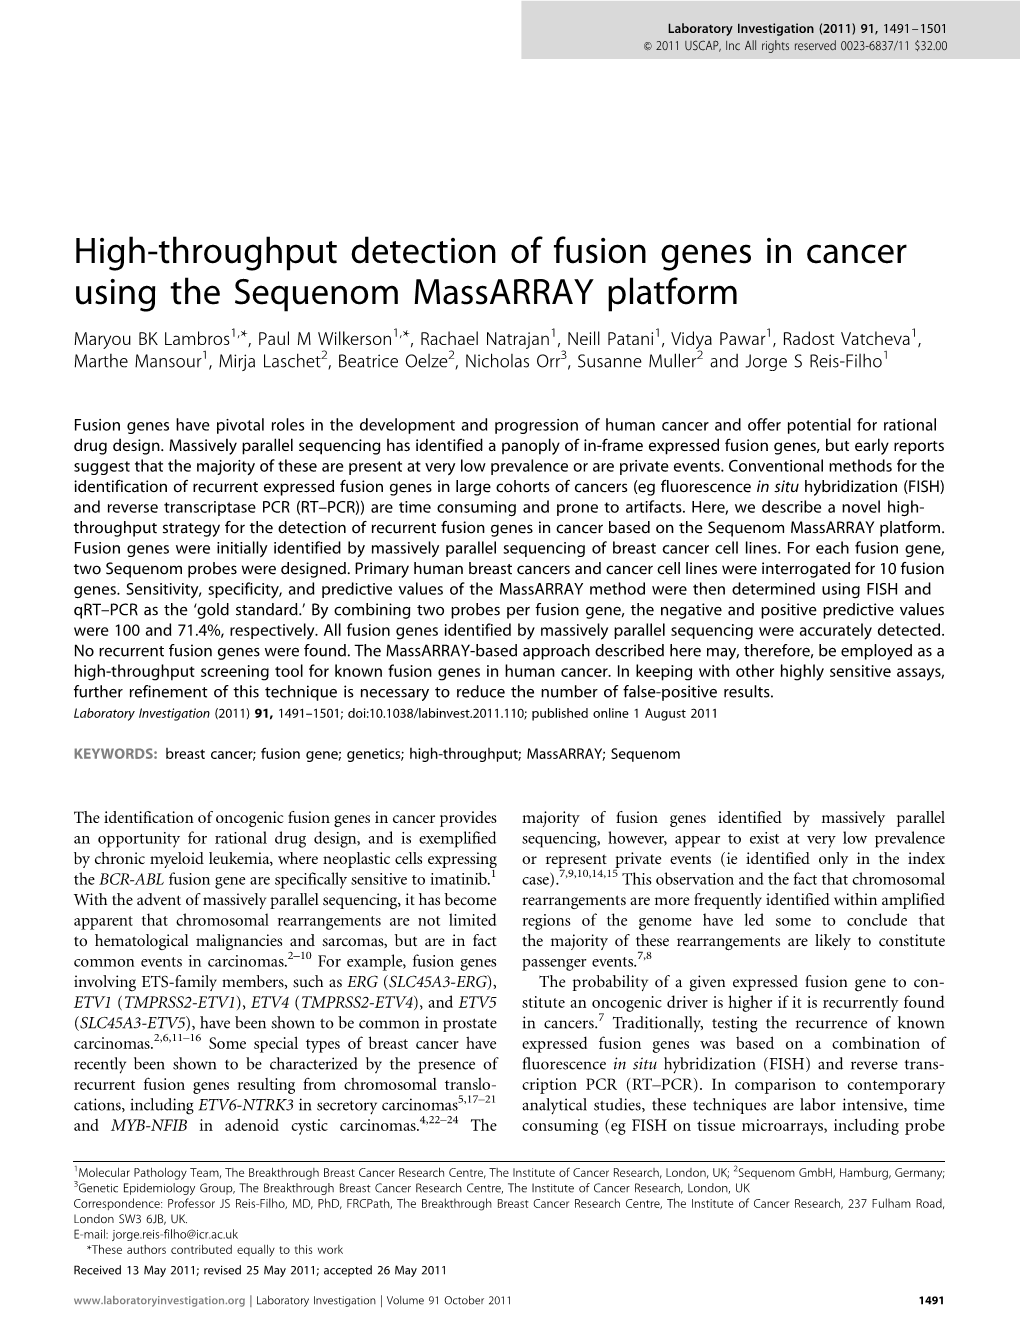 High-Throughput Detection of Fusion Genes in Cancer Using The